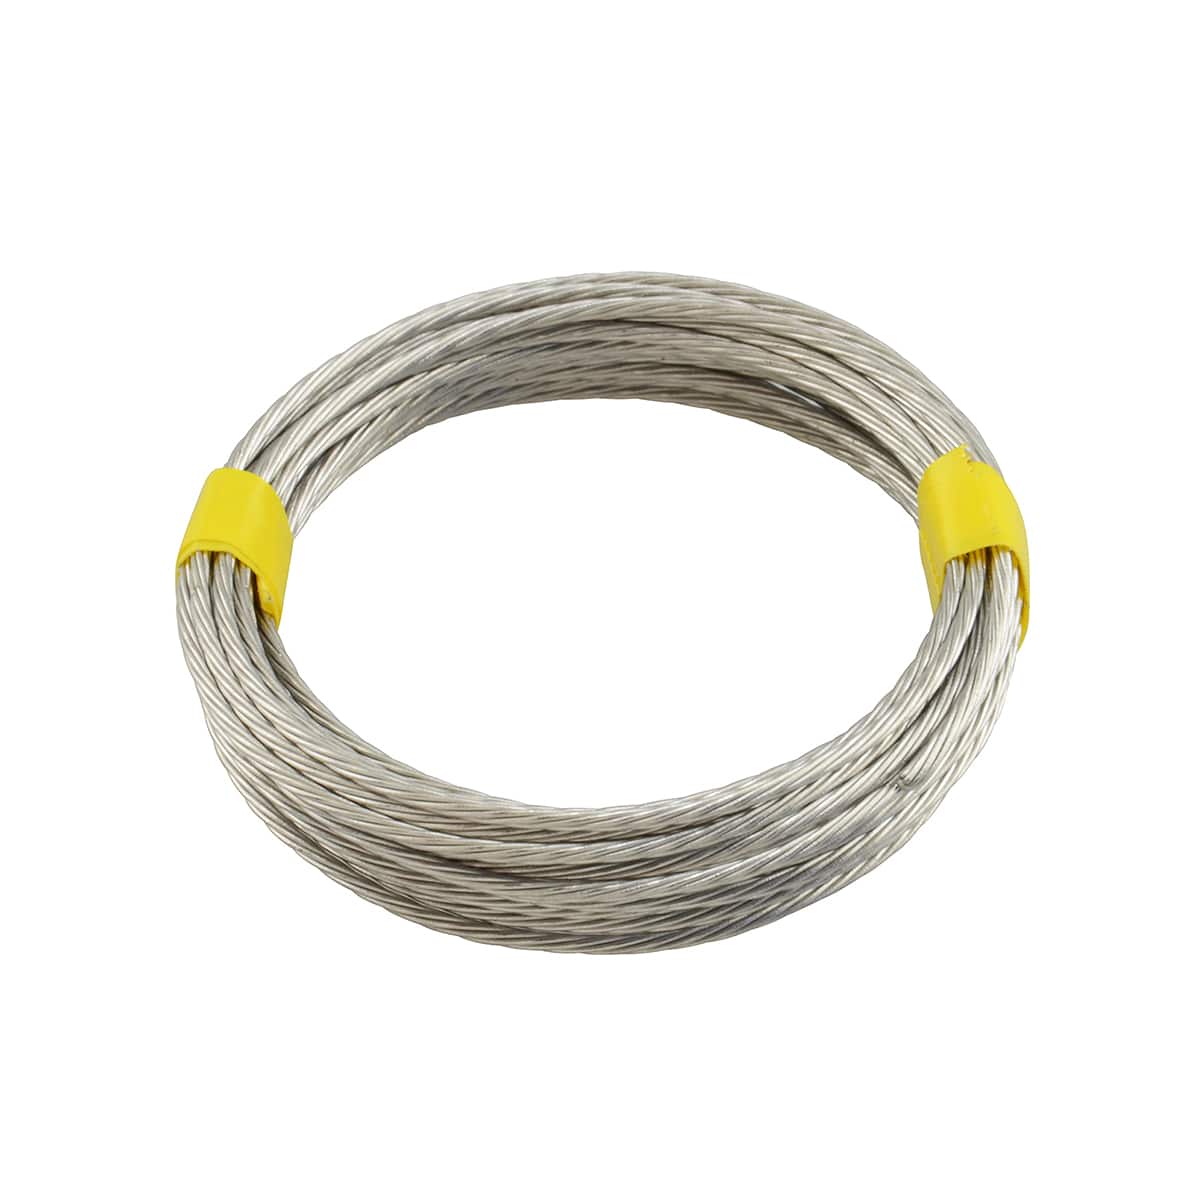 Shop for the 9ft. Galvanized Braided Hanging Wire, 20lb. at Michaels